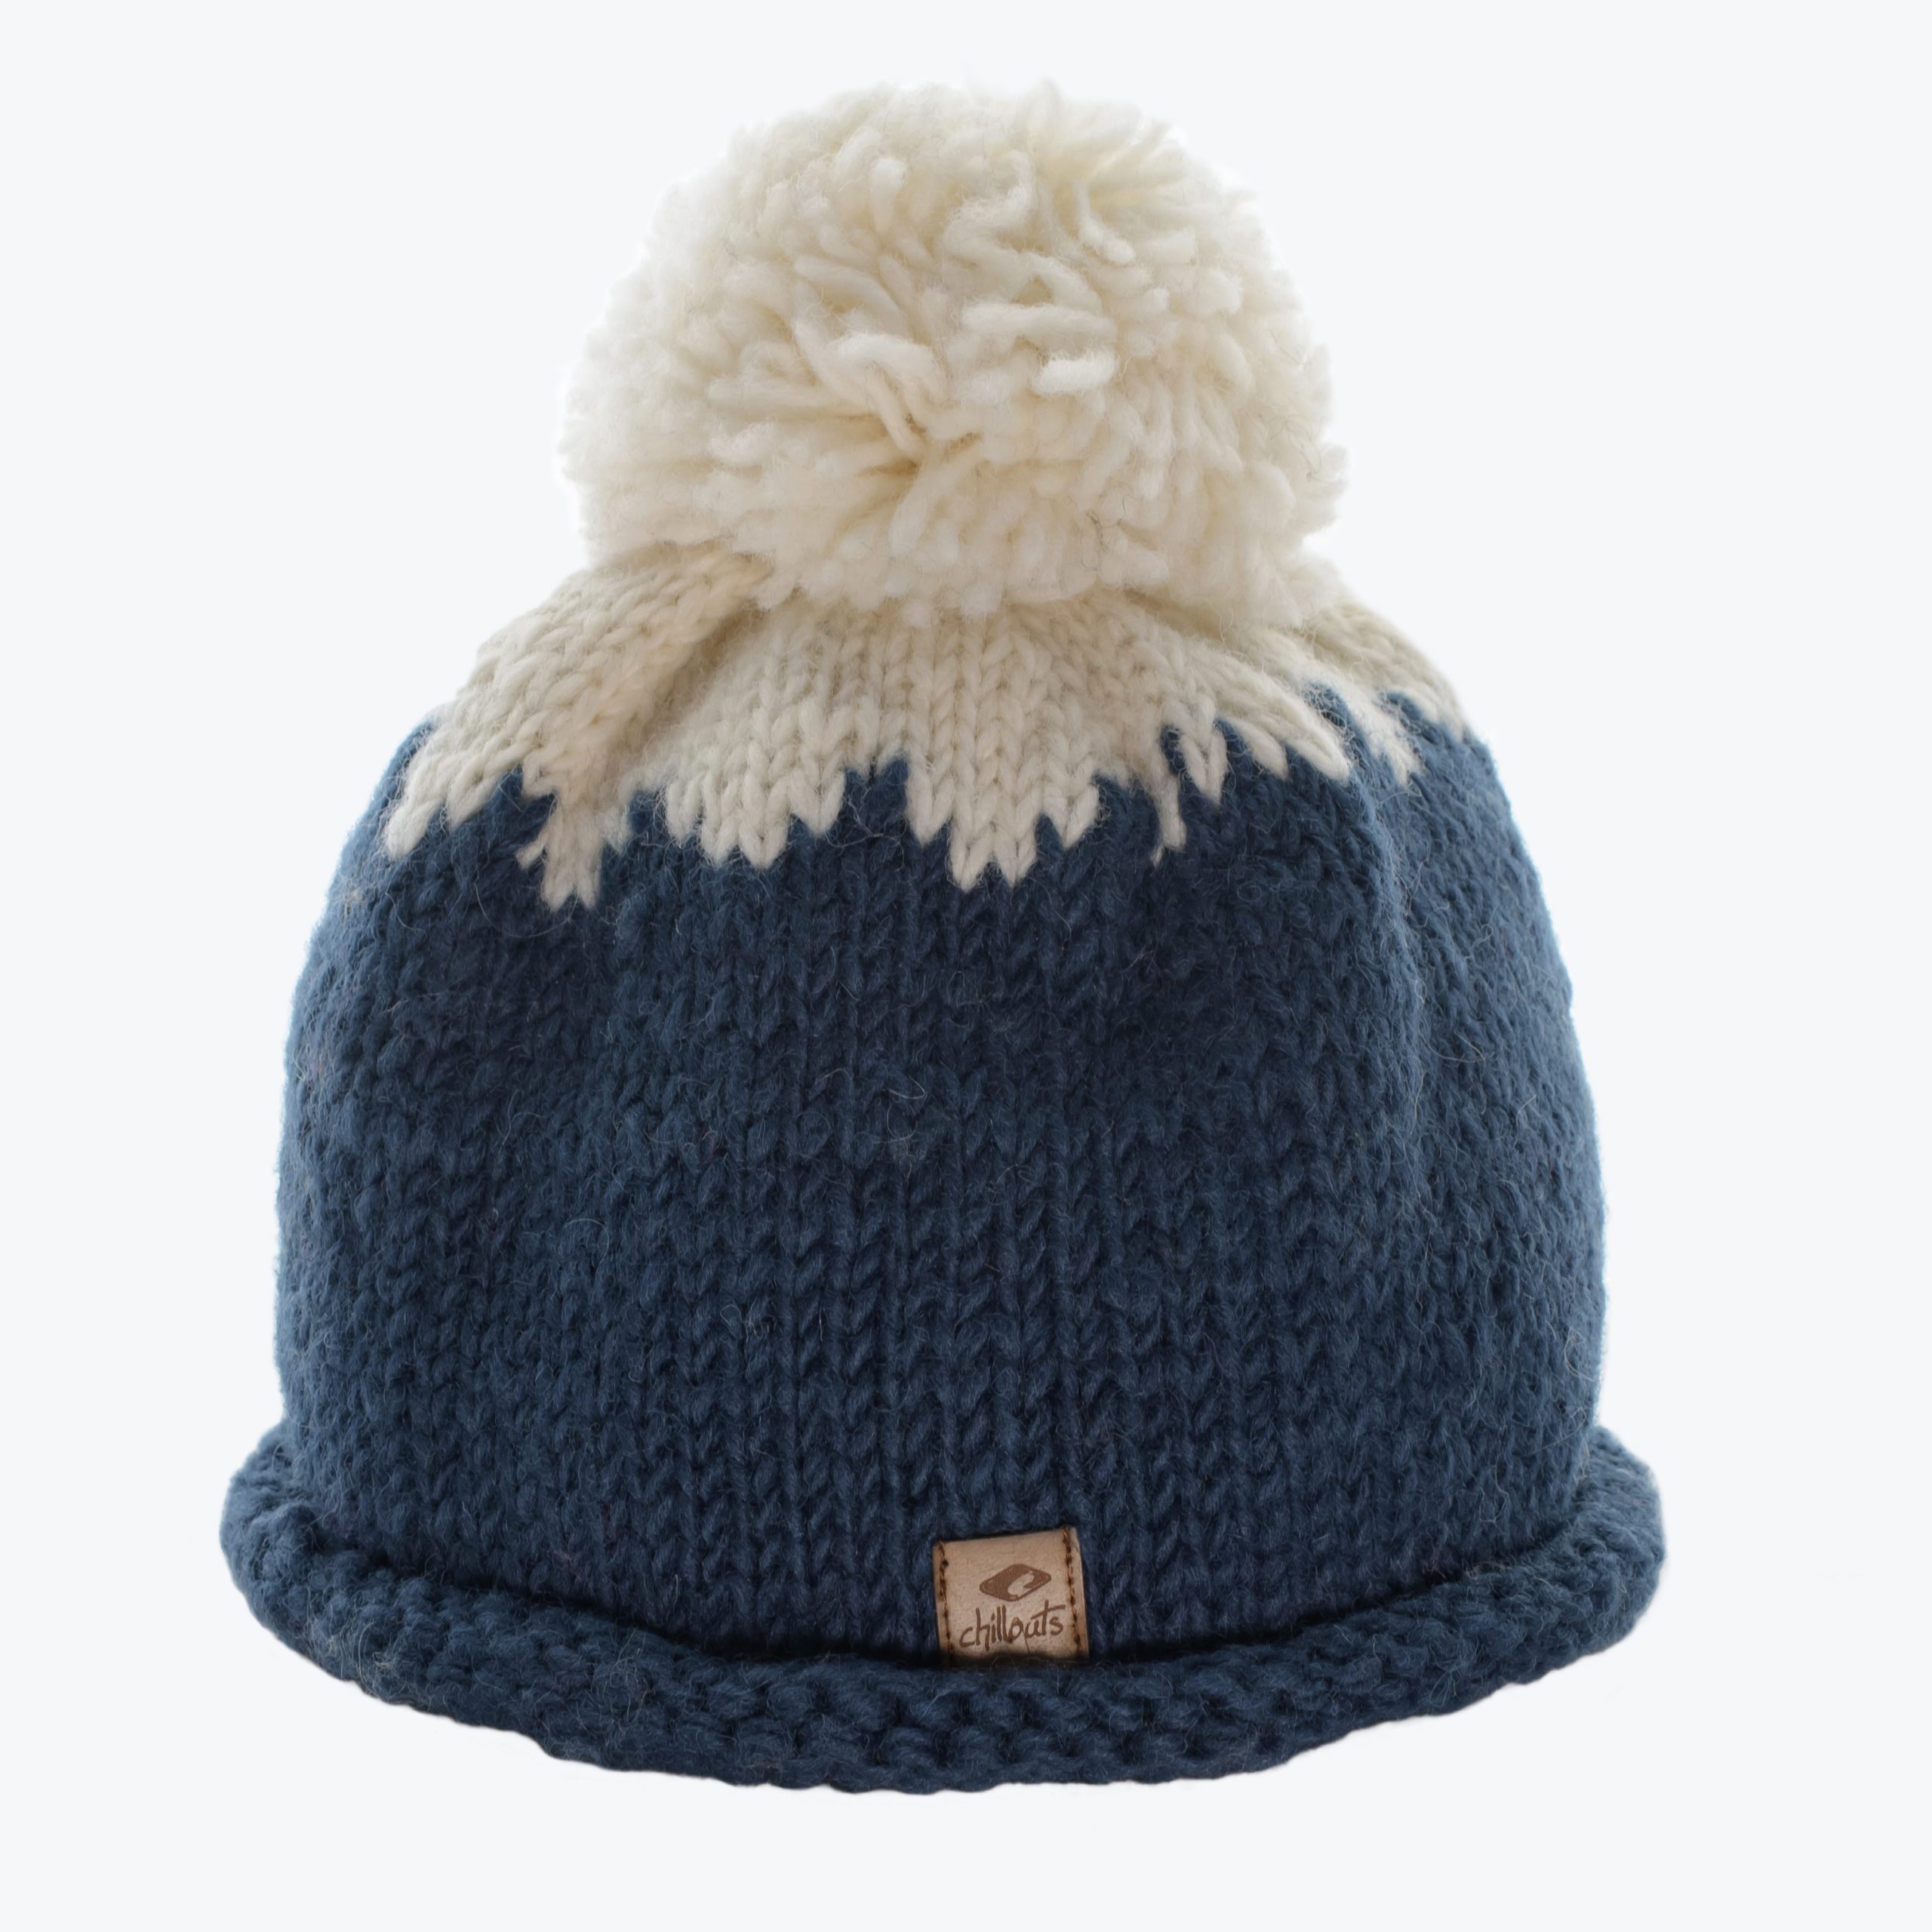 CHILLOUTS KID’S KNITTED BEANIE -BLUE